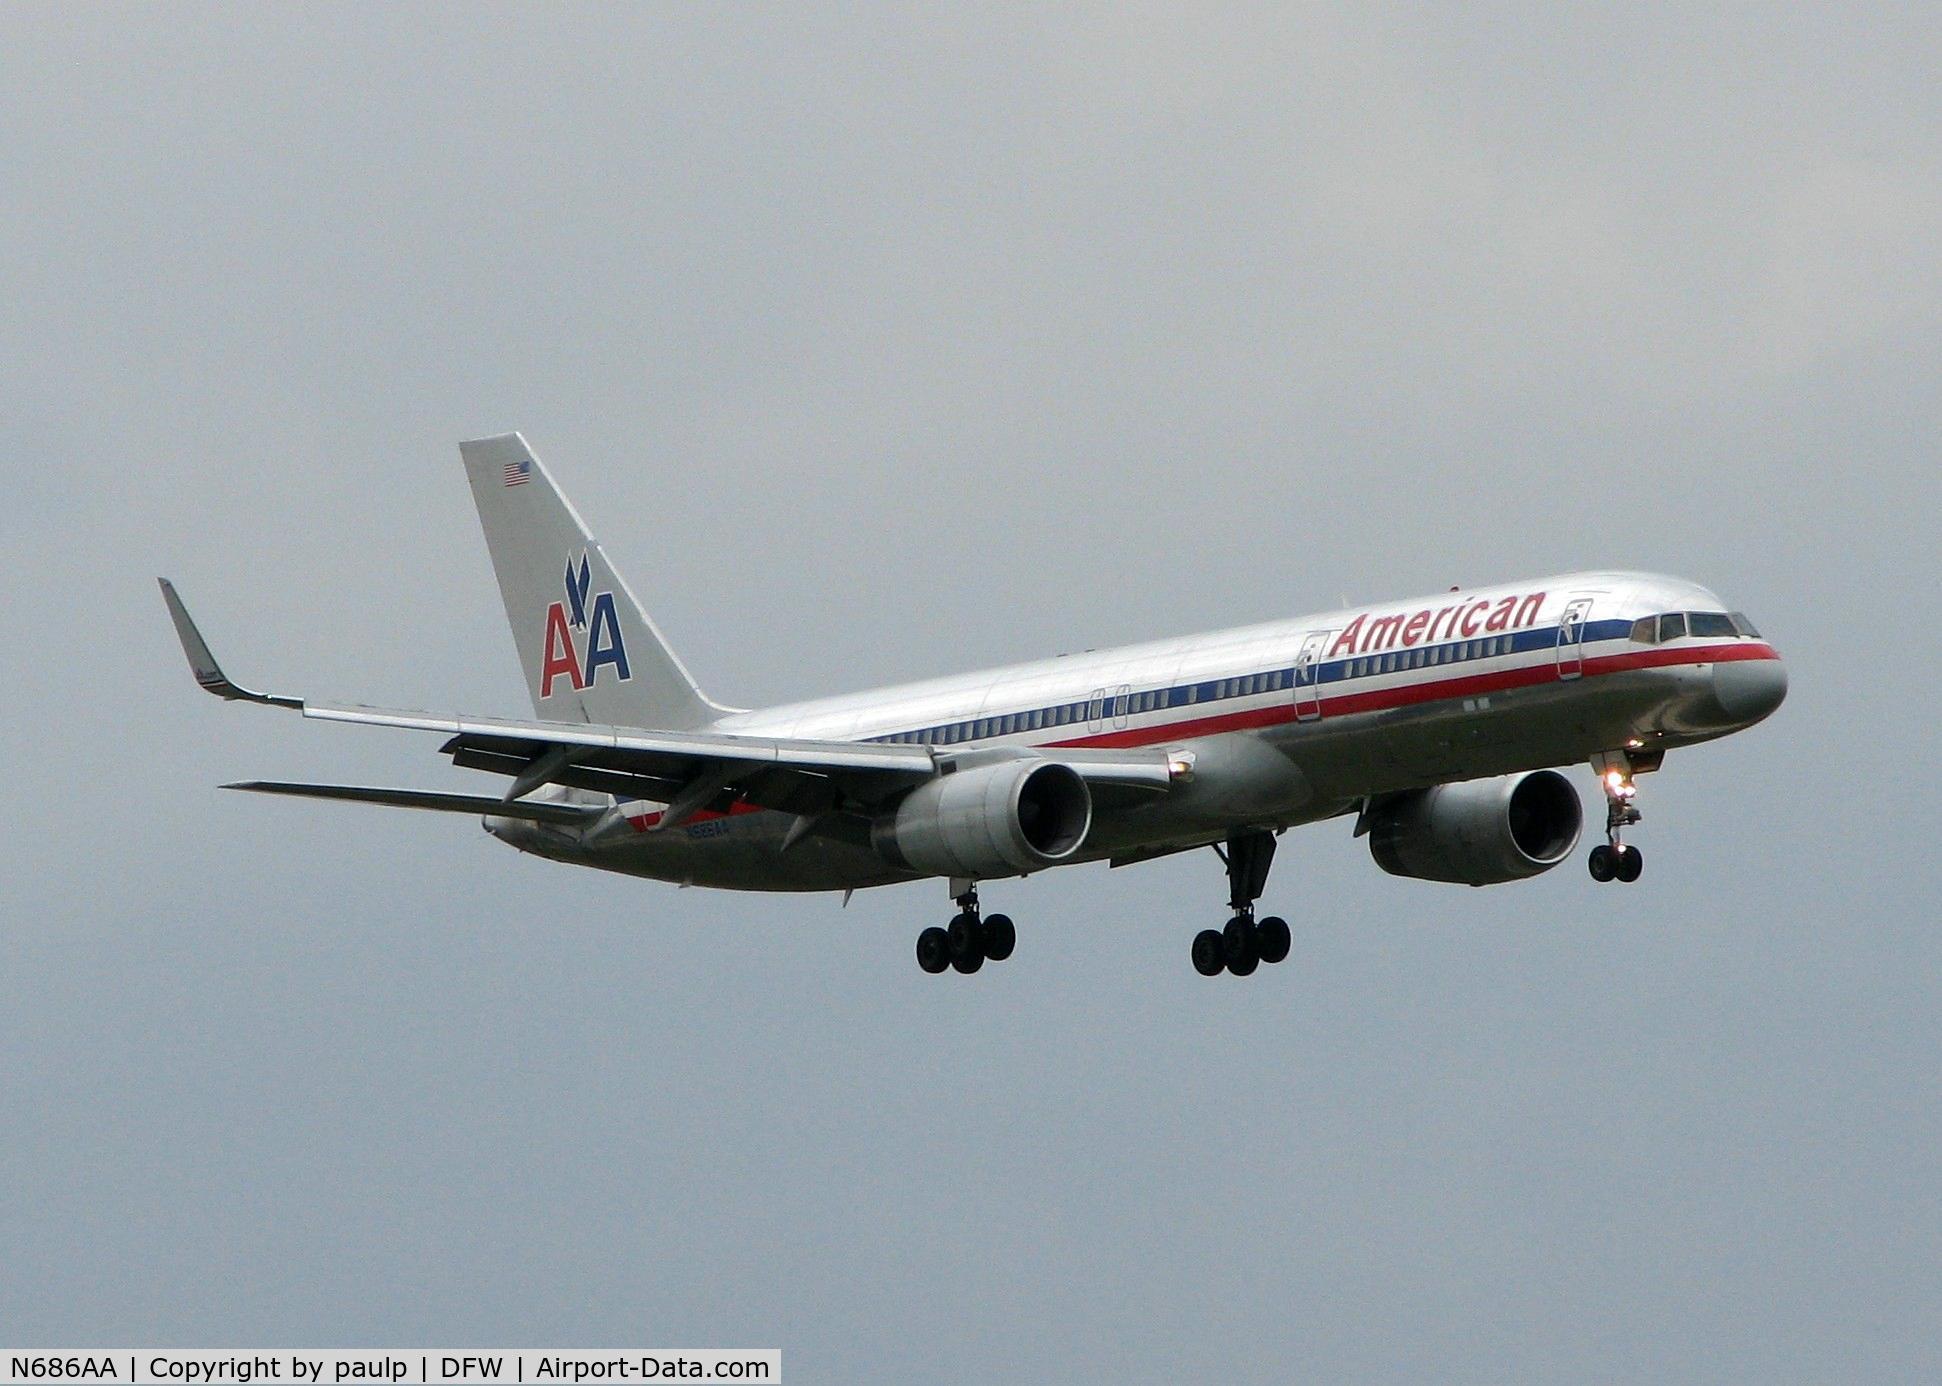 N686AA, 1992 Boeing 757-223 C/N 25343, American 757 landing on 18R at DFW on a rainy, overcast day!